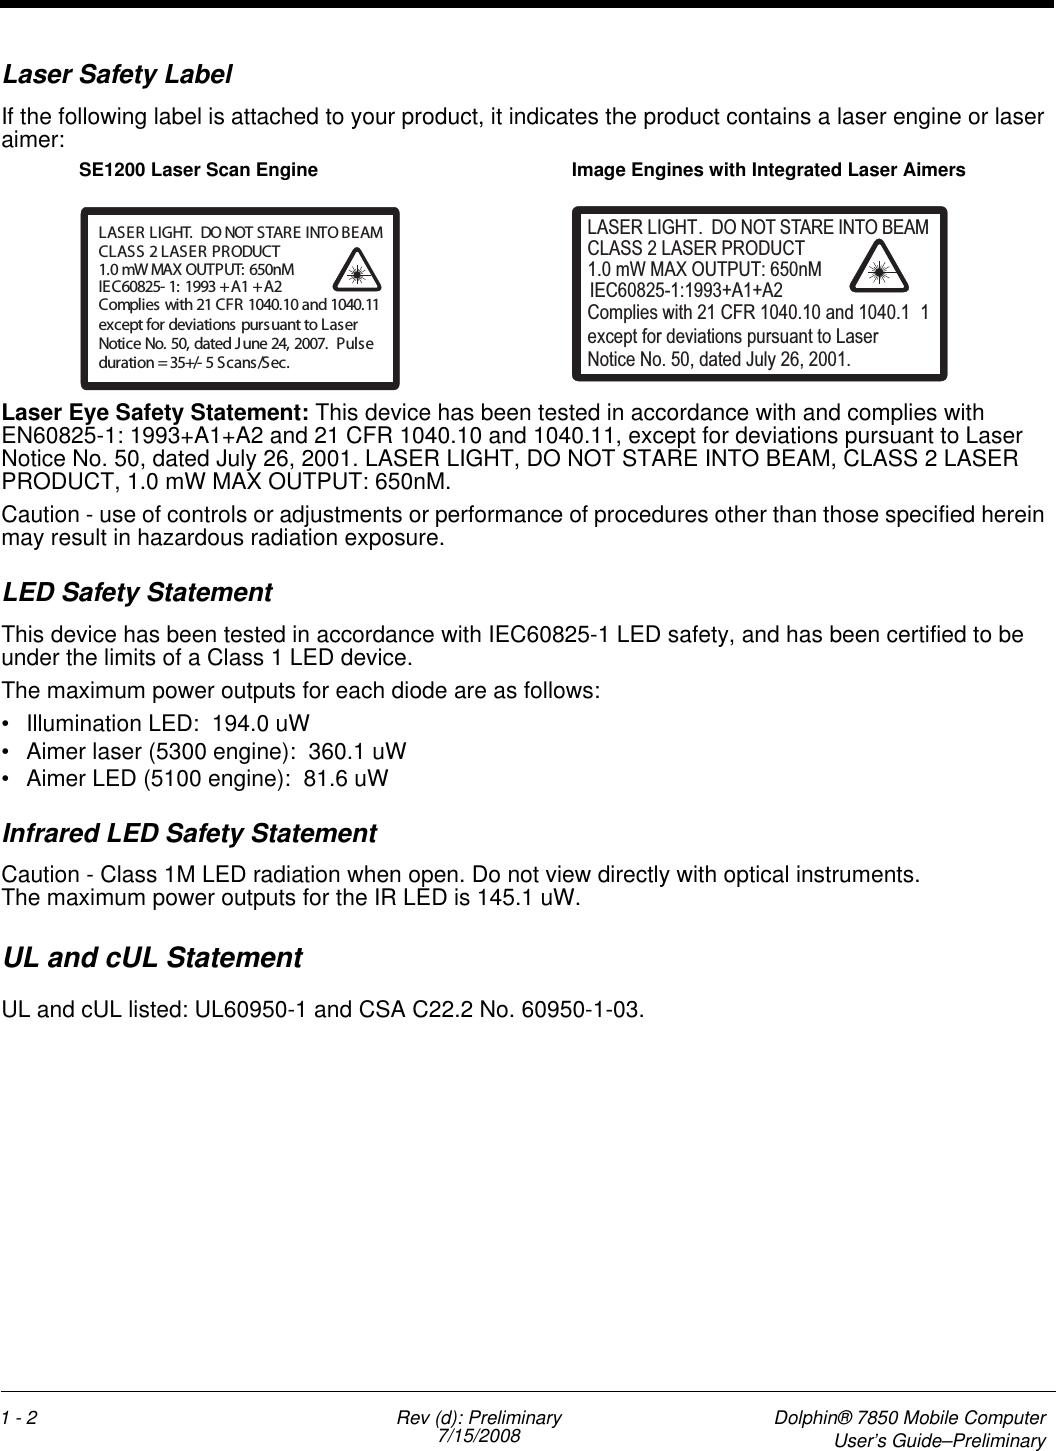 1 - 2 Rev (d): Preliminary7/15/2008 Dolphin® 7850 Mobile ComputerUser’s Guide–PreliminaryLaser Safety LabelIf the following label is attached to your product, it indicates the product contains a laser engine or laser aimer: Laser Eye Safety Statement: This device has been tested in accordance with and complies with EN60825-1: 1993+A1+A2 and 21 CFR 1040.10 and 1040.11, except for deviations pursuant to Laser Notice No. 50, dated July 26, 2001. LASER LIGHT, DO NOT STARE INTO BEAM, CLASS 2 LASER PRODUCT, 1.0 mW MAX OUTPUT: 650nM. Caution - use of controls or adjustments or performance of procedures other than those specified herein may result in hazardous radiation exposure.LED Safety StatementThis device has been tested in accordance with IEC60825-1 LED safety, and has been certified to be under the limits of a Class 1 LED device.The maximum power outputs for each diode are as follows:• Illumination LED:  194.0 uW• Aimer laser (5300 engine):  360.1 uW• Aimer LED (5100 engine):  81.6 uWInfrared LED Safety StatementCaution - Class 1M LED radiation when open. Do not view directly with optical instruments. The maximum power outputs for the IR LED is 145.1 uW.UL and cUL StatementUL and cUL listed: UL60950-1 and CSA C22.2 No. 60950-1-03.LASER LIGHT. DO NOT STARE INTO BEAM1.0 mW MAX OUTPUT: 650nMIEC60825- 1: 1993 + A1 + A2CLASS2LASERPRODUCTComplies with 21 CFR 1040.10 and 1040.11except for deviations pursuant to LaserNotice No. 50, dated J une 24, 2007. Puls eduration = 35+/- 5 S cans /Sec.LASER LIGHT. DO NOT STARE INTO BEAM1.0 mW MAX OUTPUT: 650nMIEC60825-1:1993+A1+A2CLASS 2 LASER PRODUCTComplies with 21 CFR 1040.10 and 1040.1 1except for deviations pursuant to Laser Notice No. 50, dated July 26, 2001.SE1200 Laser Scan Engine Image Engines with Integrated Laser Aimers